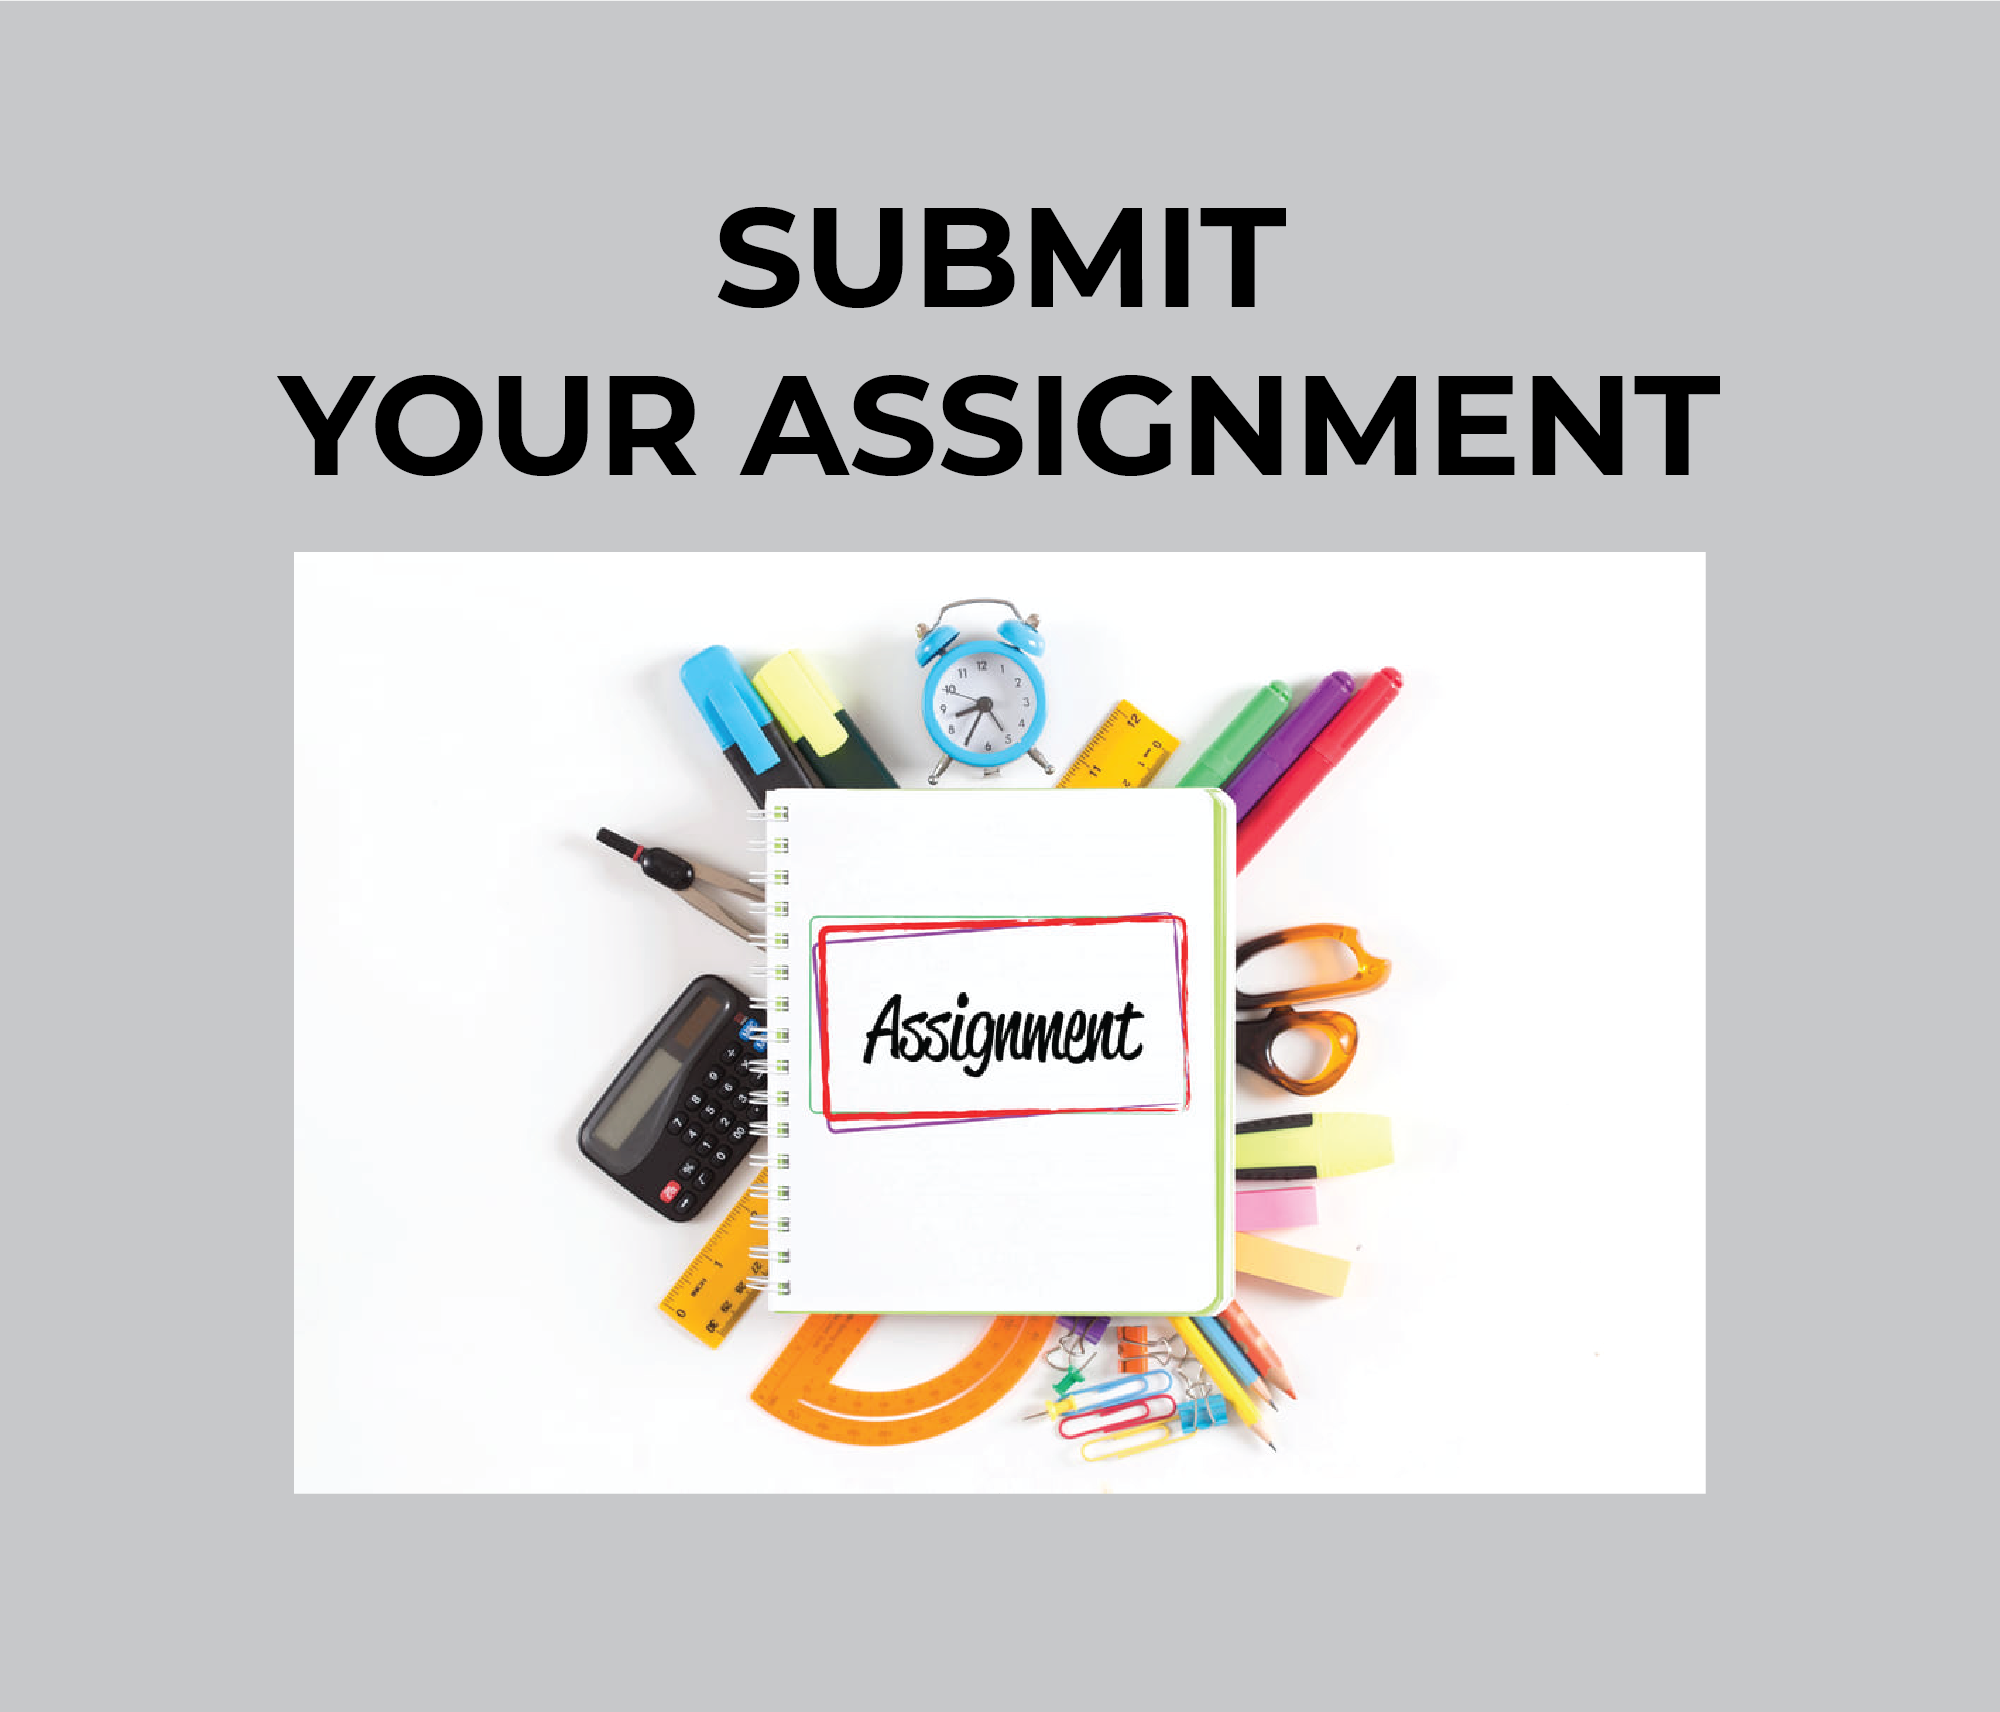 submit your assignment as directed